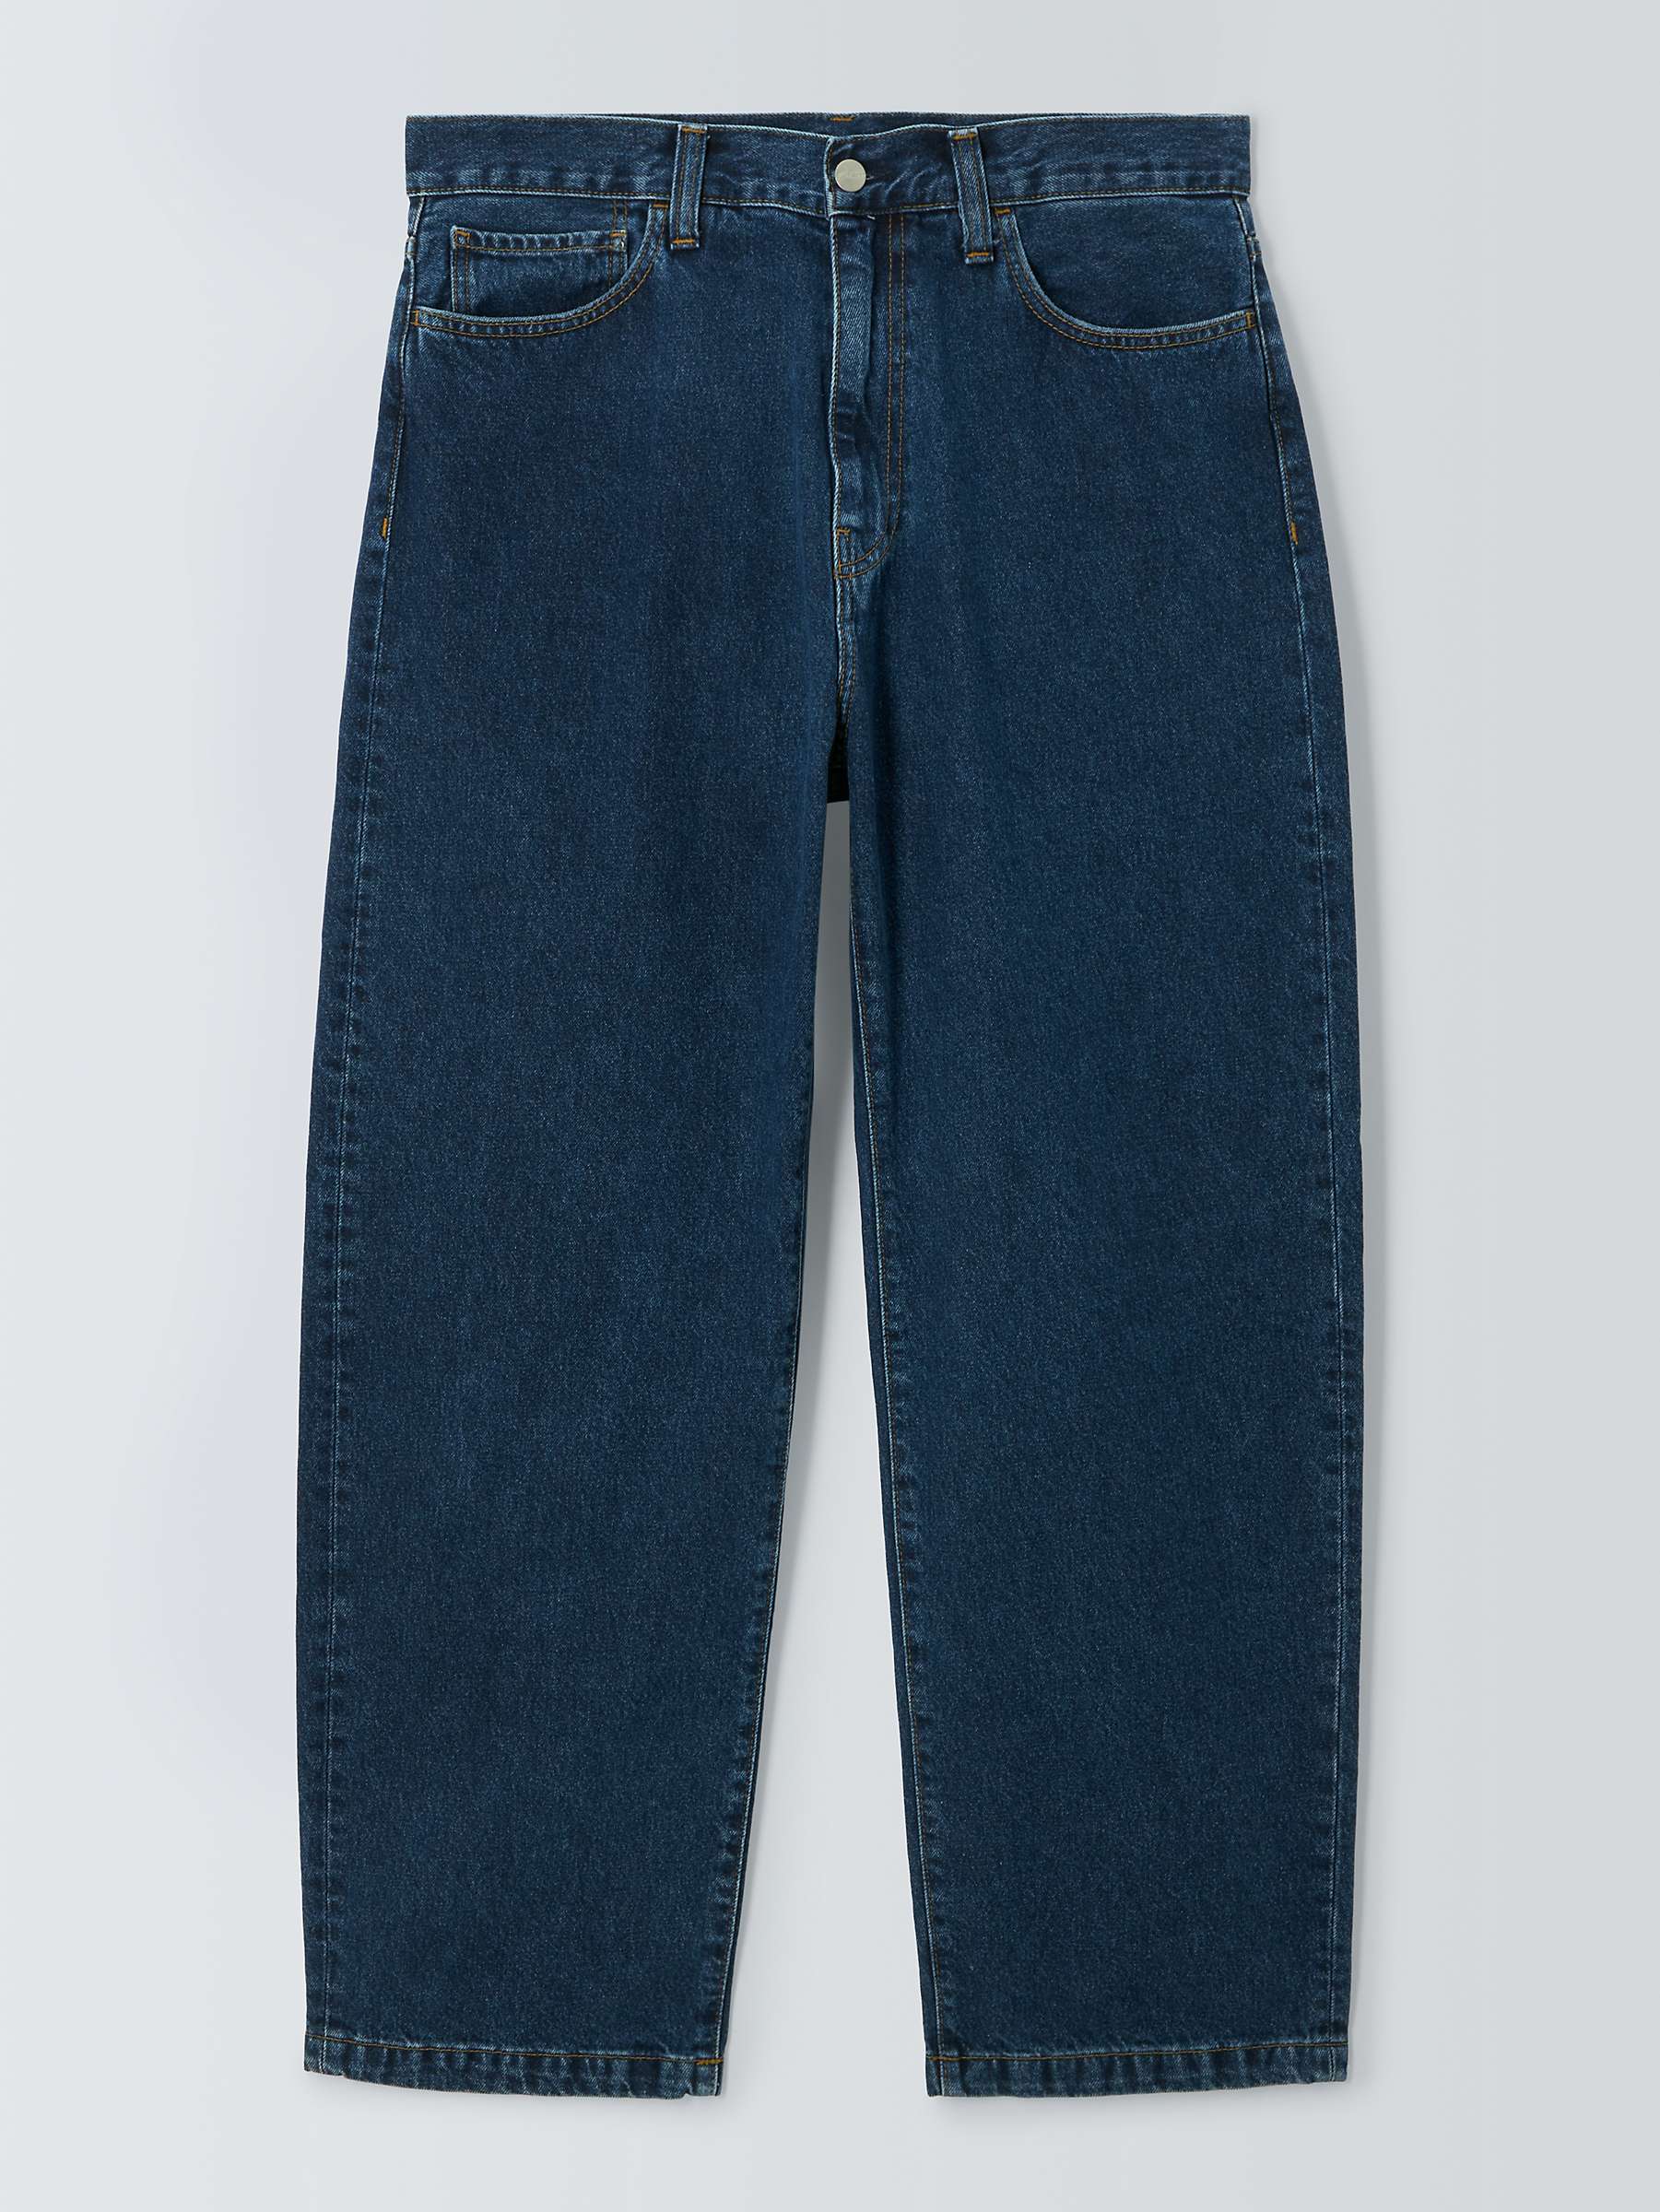 Buy Carhartt WIP Landon Loose Tapered Fit Jeans, Blue Online at johnlewis.com